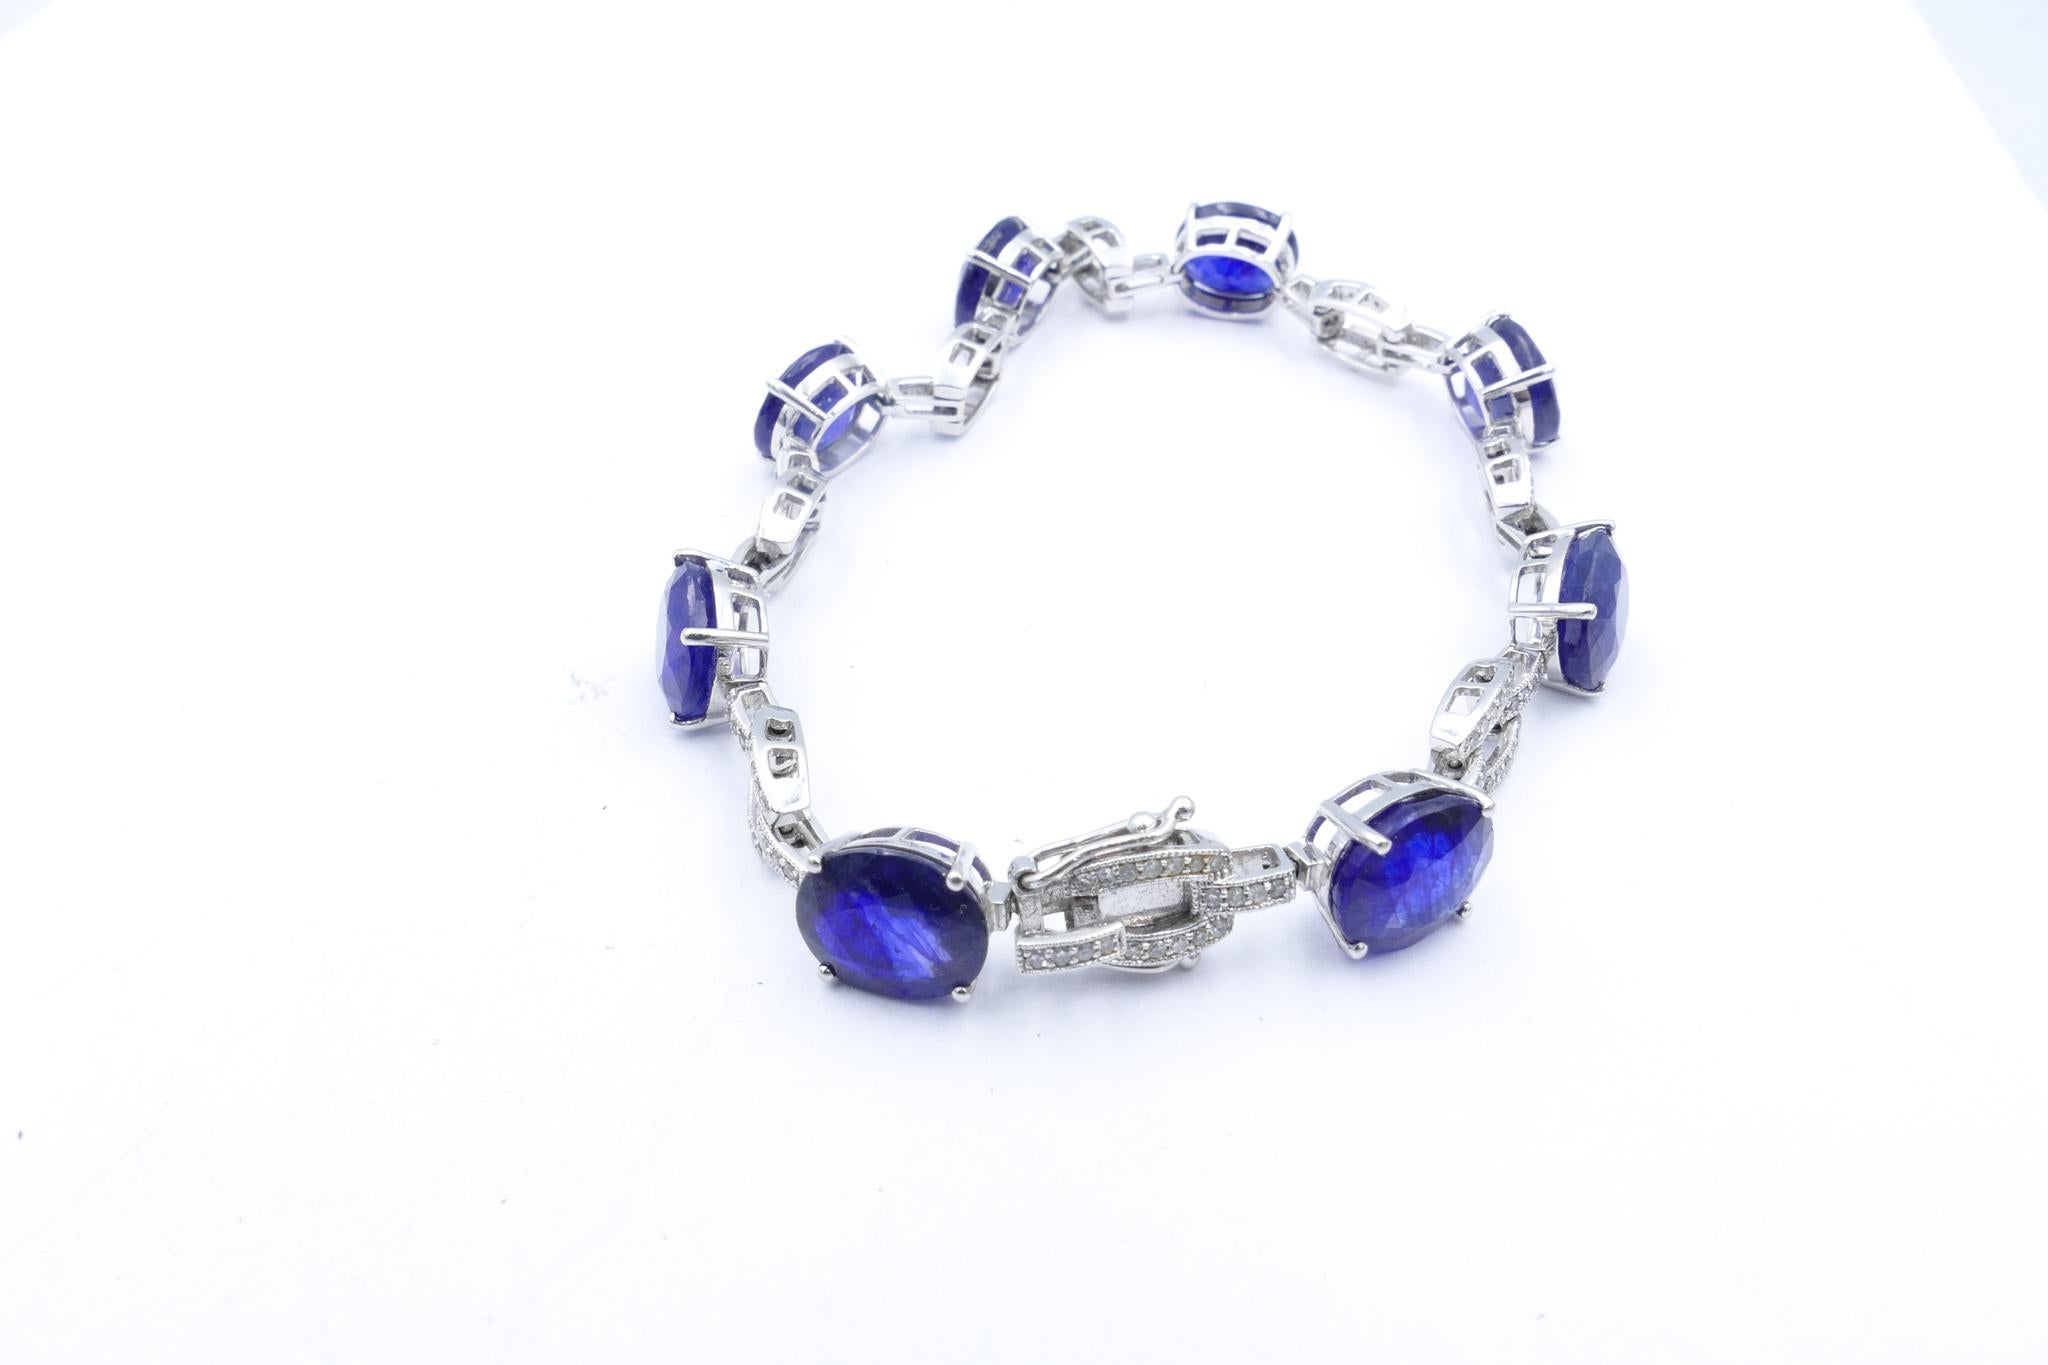 This very pretty Bracelet has 18 Ceylon type oval cut, royal blue Sapphires with excellent clarity, individually claw set, flanked by 17 round single cut Diamonds, micro claw set, colour H/I and clarity SI1 - SI2'
Measurement is 17.9cm X 3.89mm with